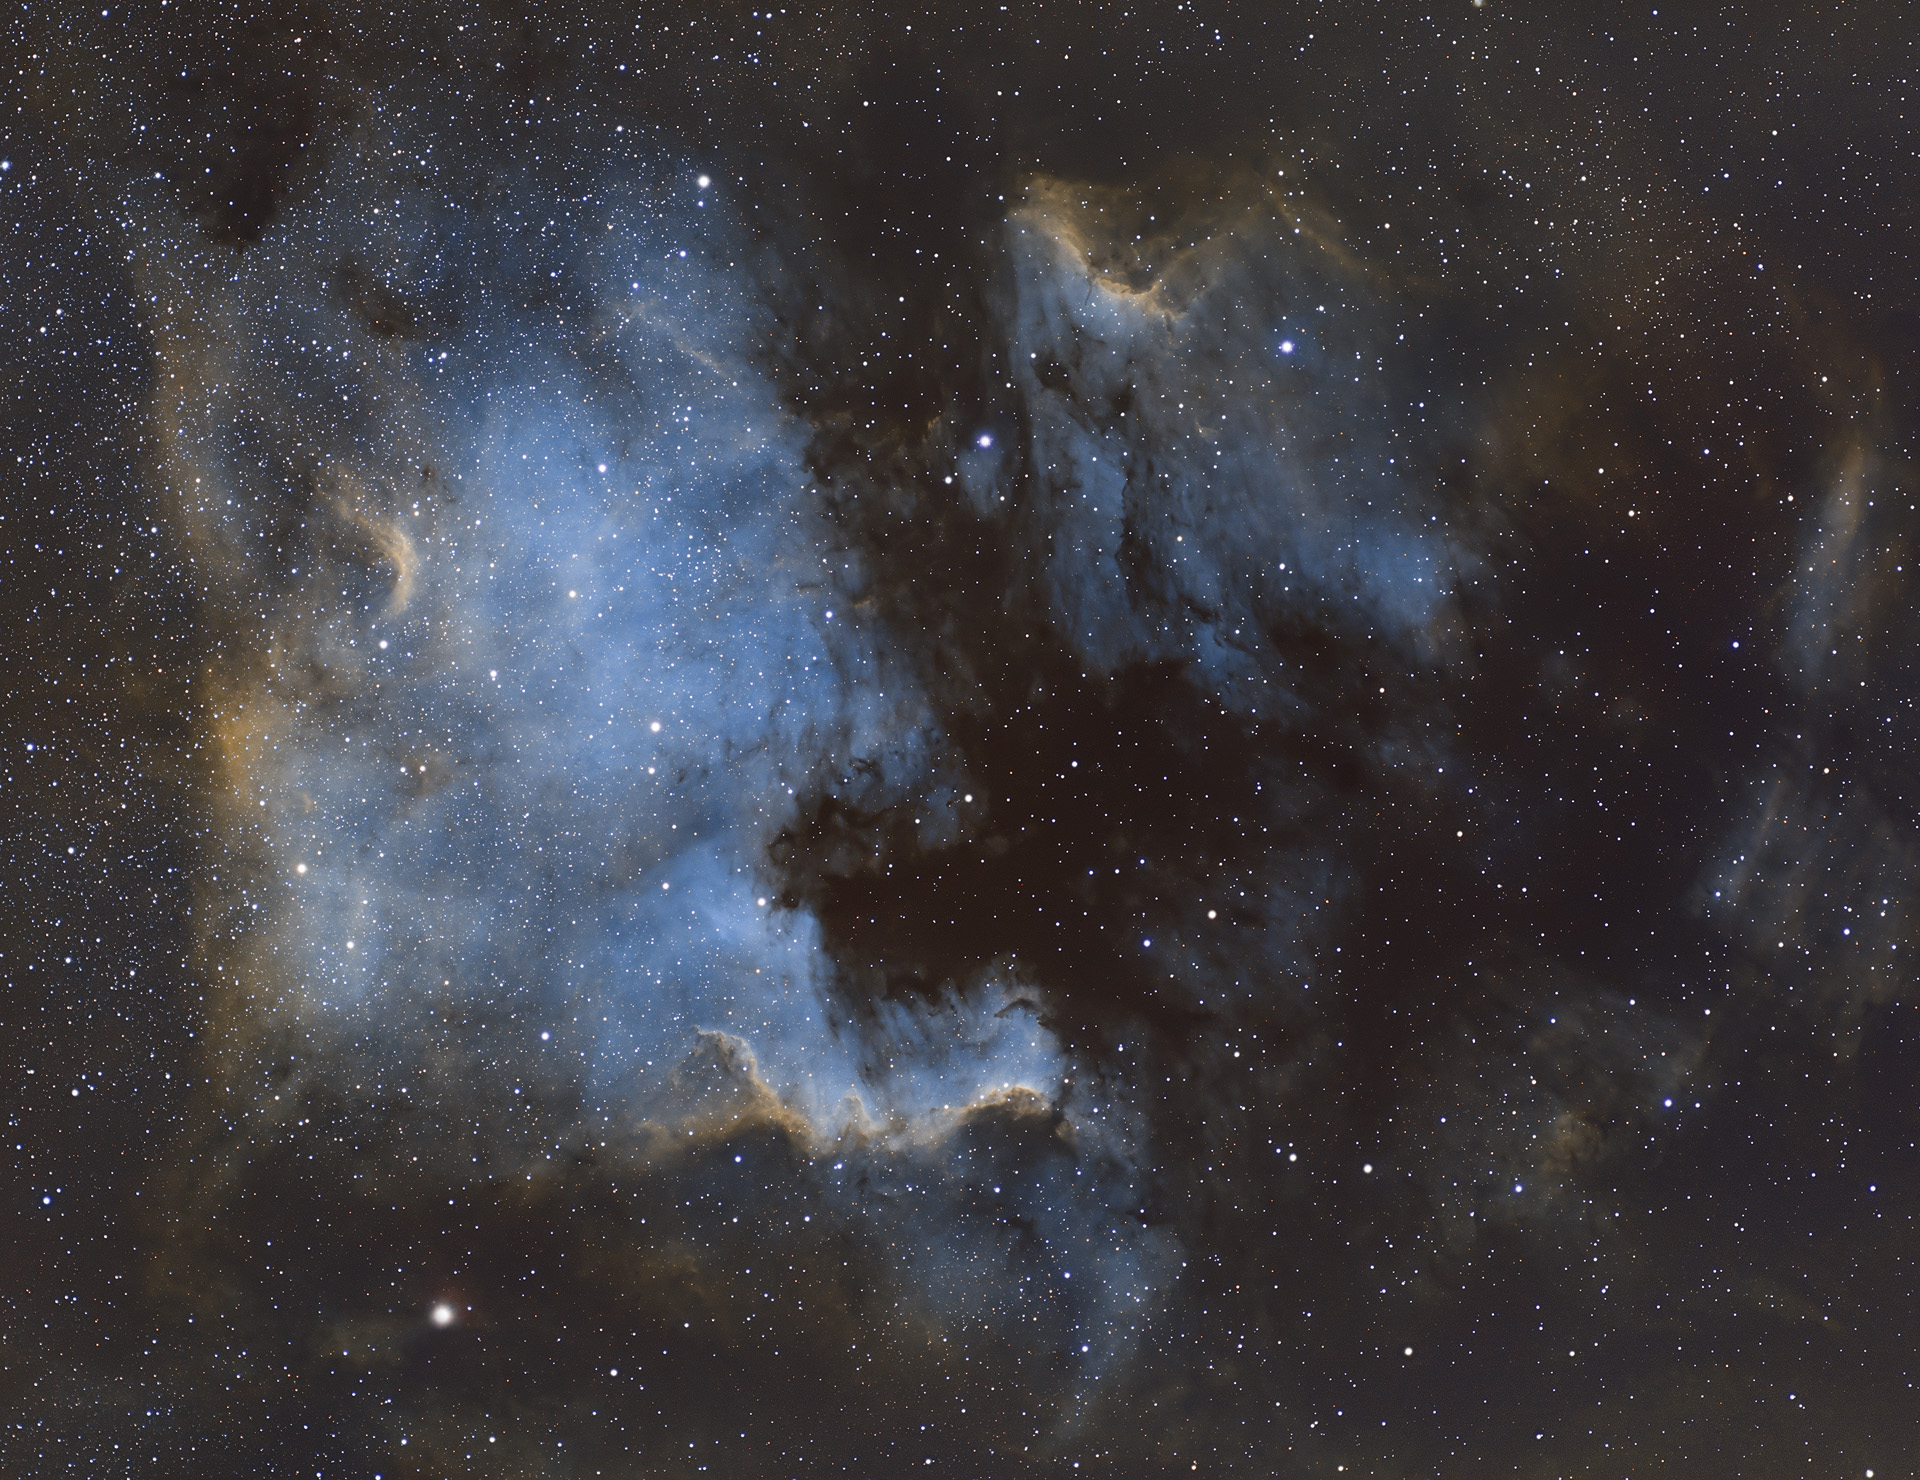 Wide field on the North American and Pelican nebulae...